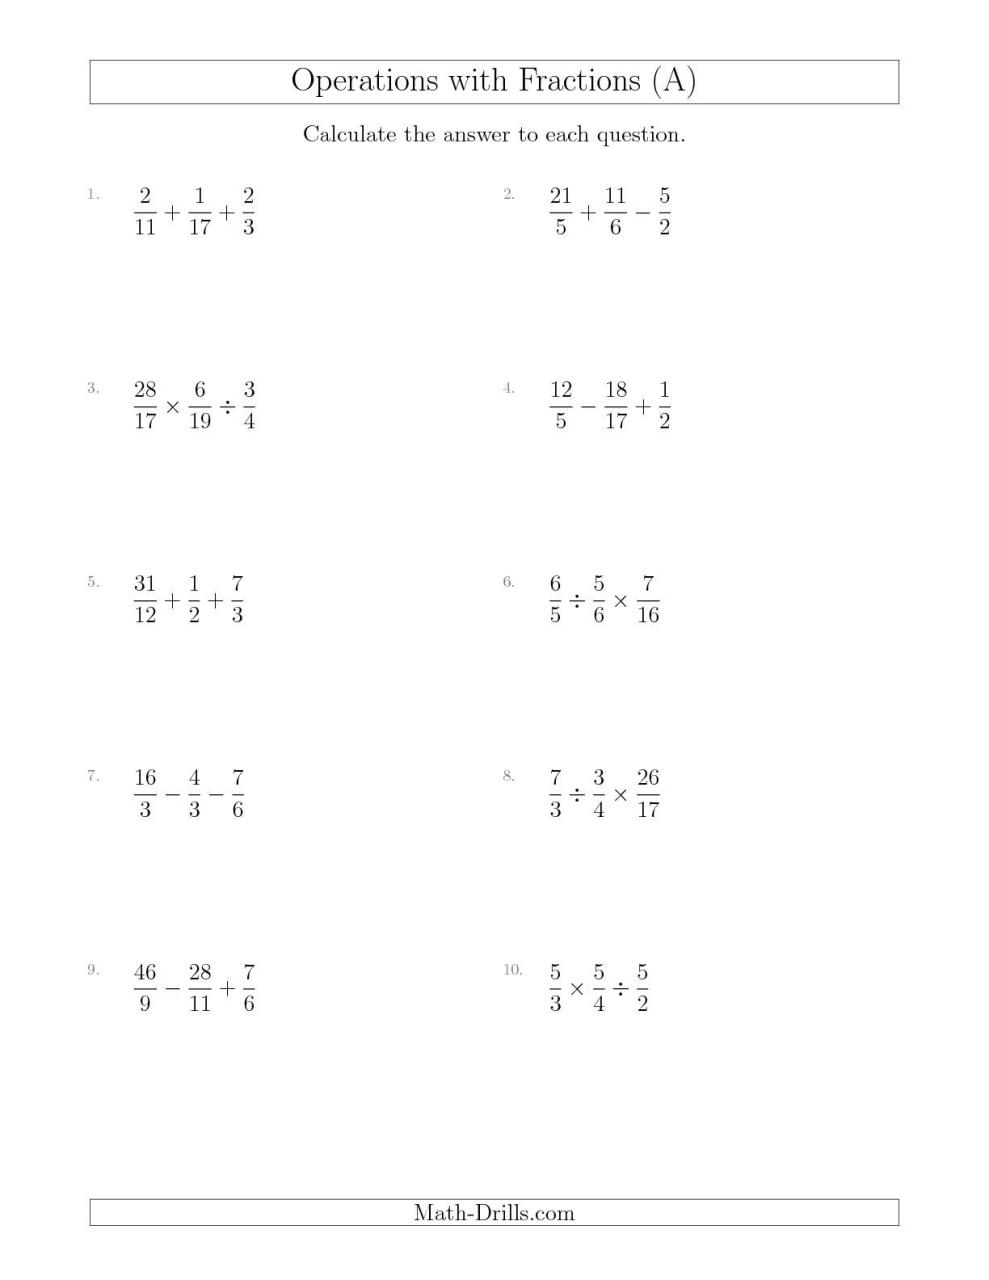 Mixed Operations with Three Fractions Including Improper Fractions (A